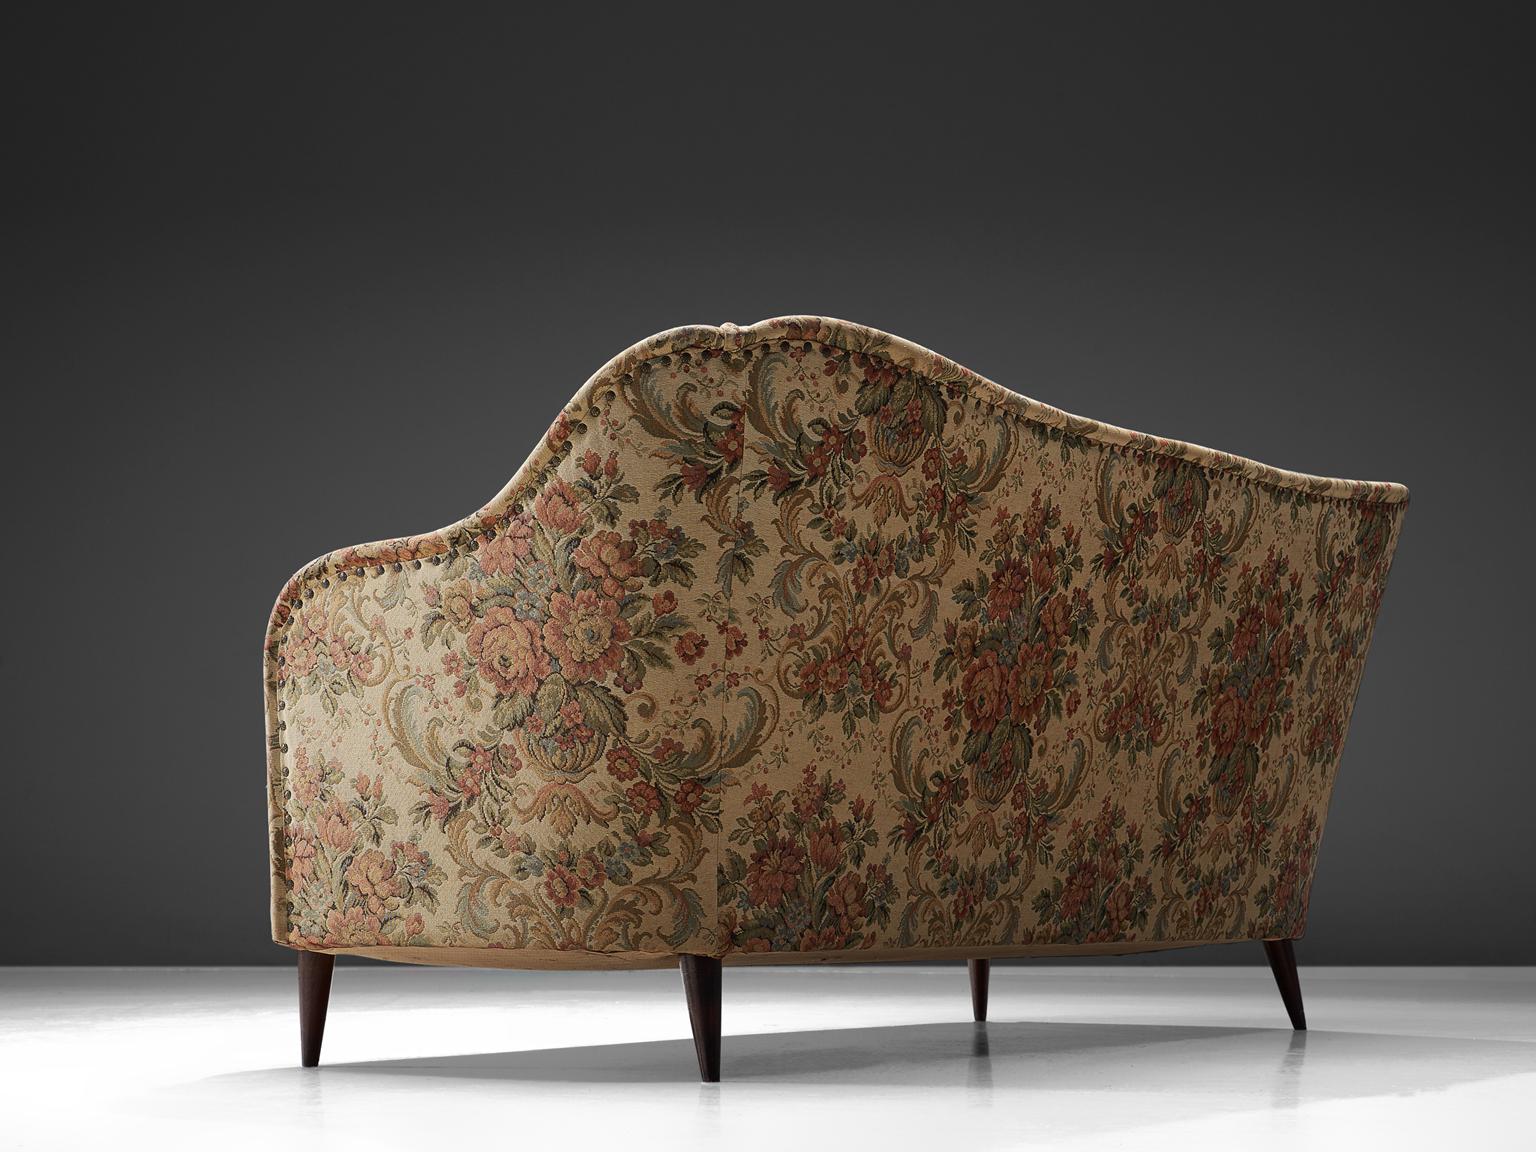 Mid-20th Century Italian Three-Seat Sofa with Floral Upholstery